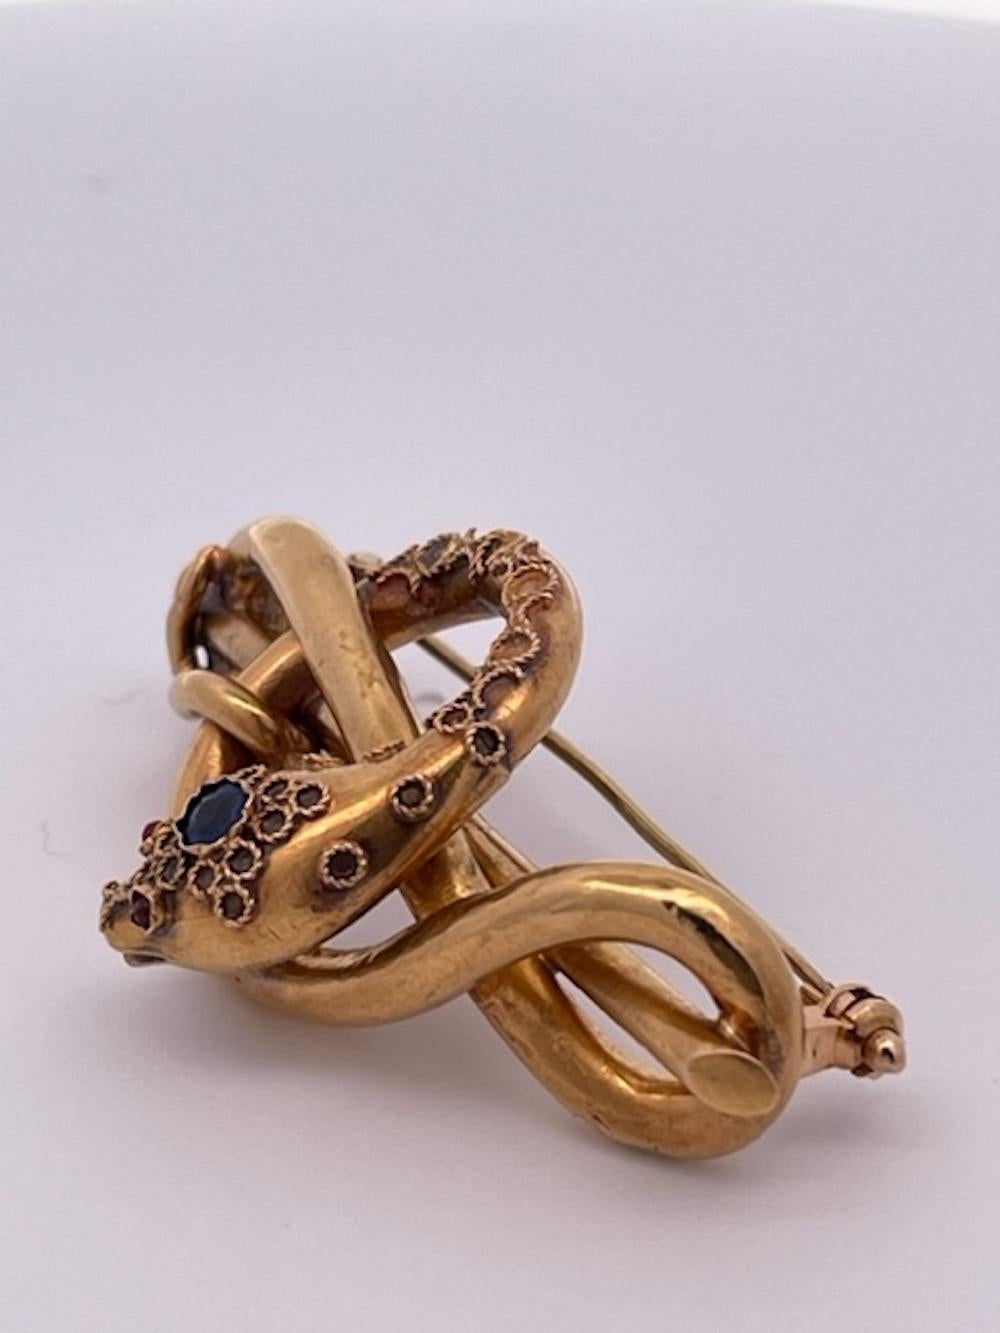 This Victorian snake brooch is just beautiful.  It has pink and Blue stones detailed and chased with scroll work completely detailed on the front with a smooth back. I rarely find chased and detailed snake brooch such as this. The brooch is